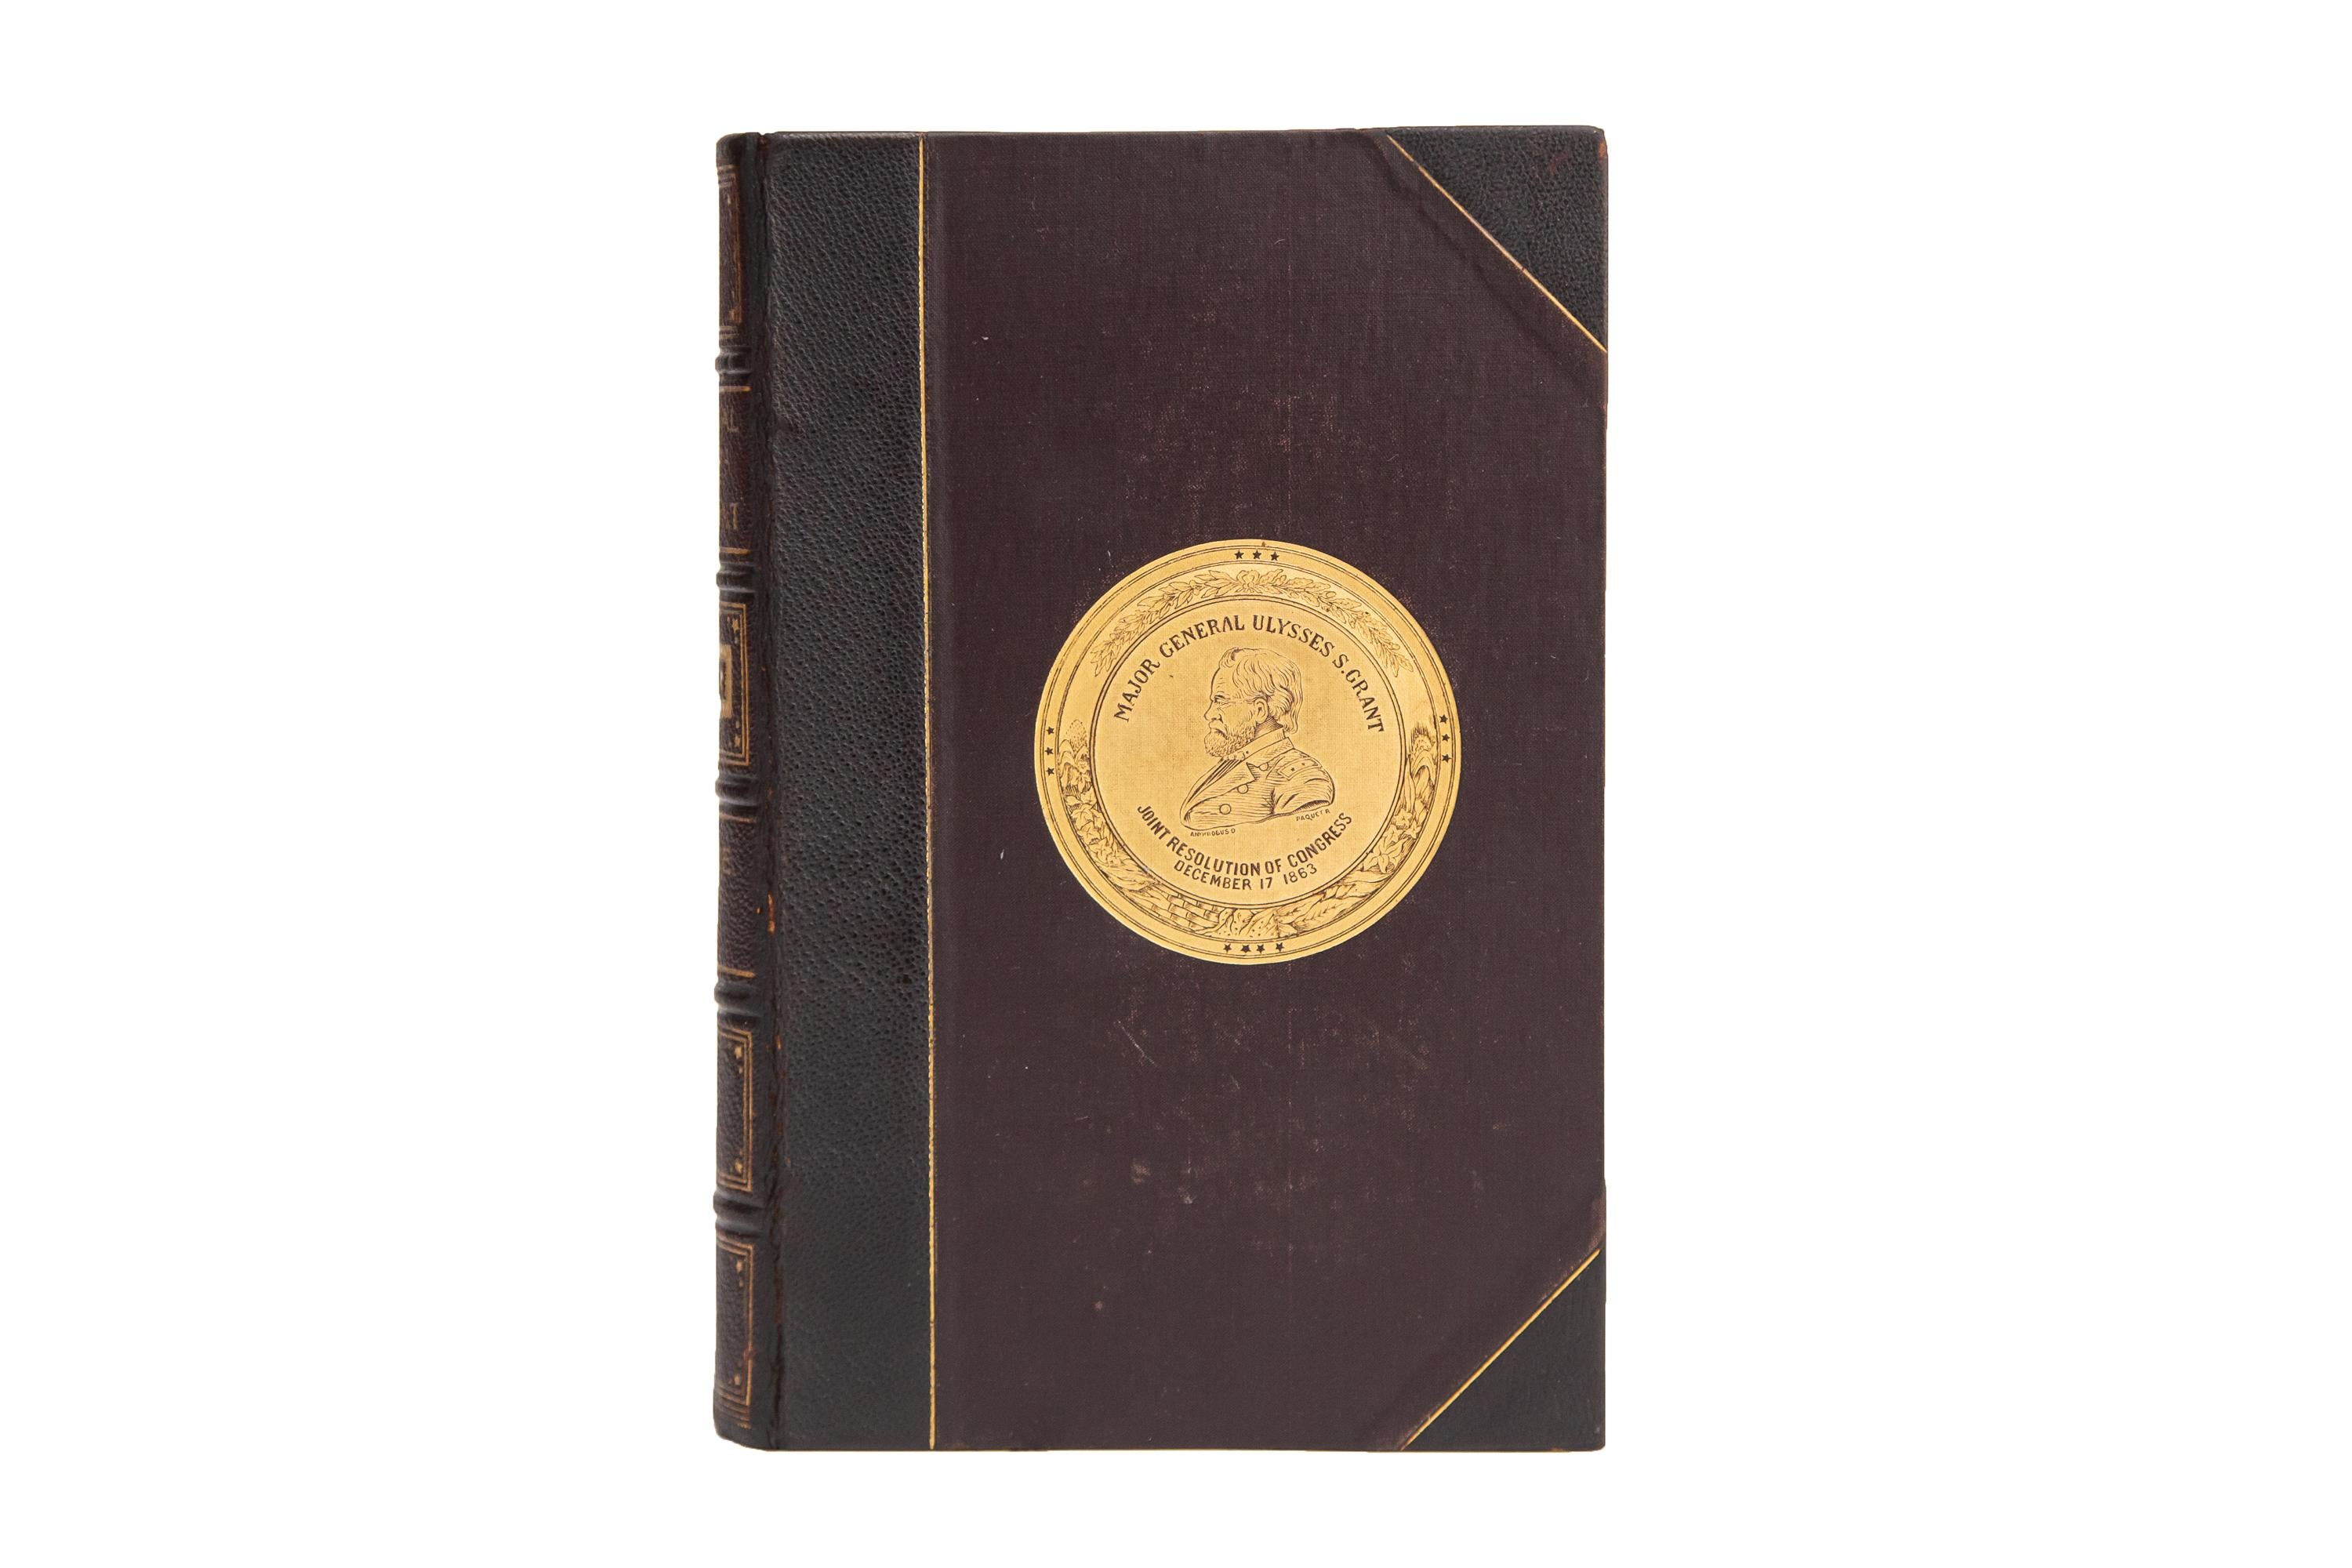 2 Volumes. U.S. Grant, Personal Memoirs. First Edition. Bound in 3/4 dark purple morocco and linen boards displaying an intricate gilt seal of Major General Ulysses S. Grant. Raised bands with panels displaying gilt Americana detailing and label